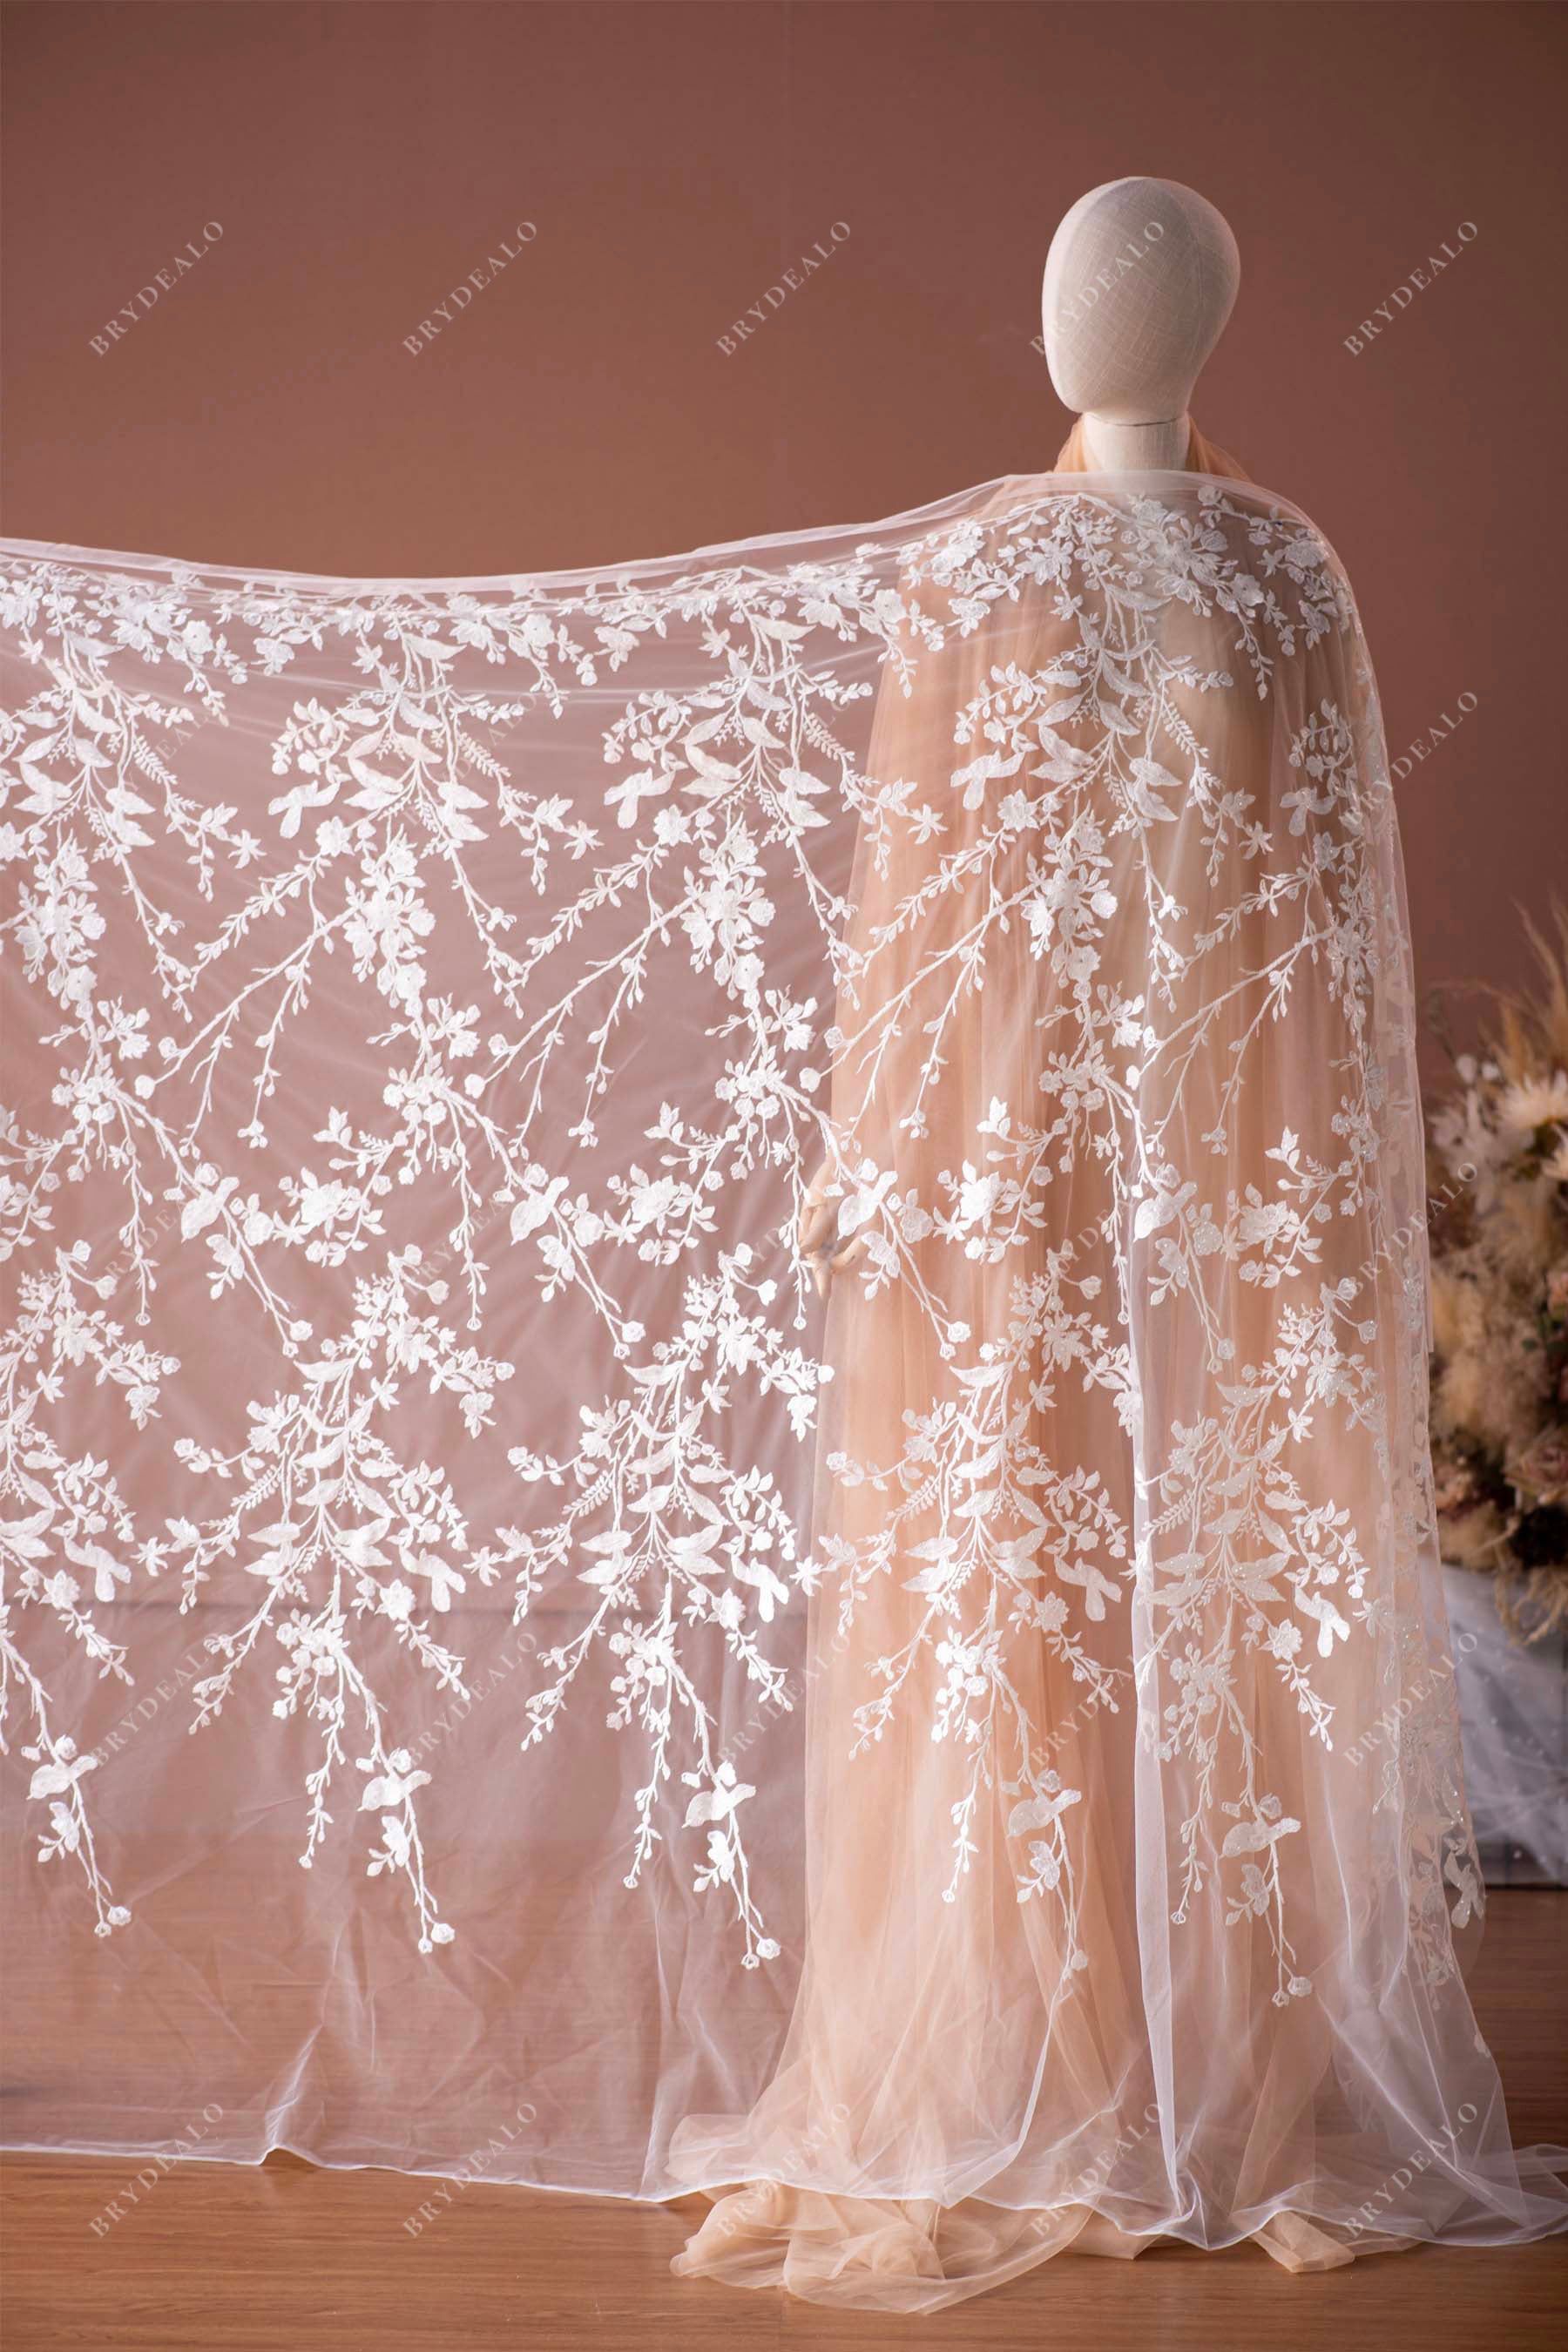 wholesale embroidery plant lace fabric for bridal dress